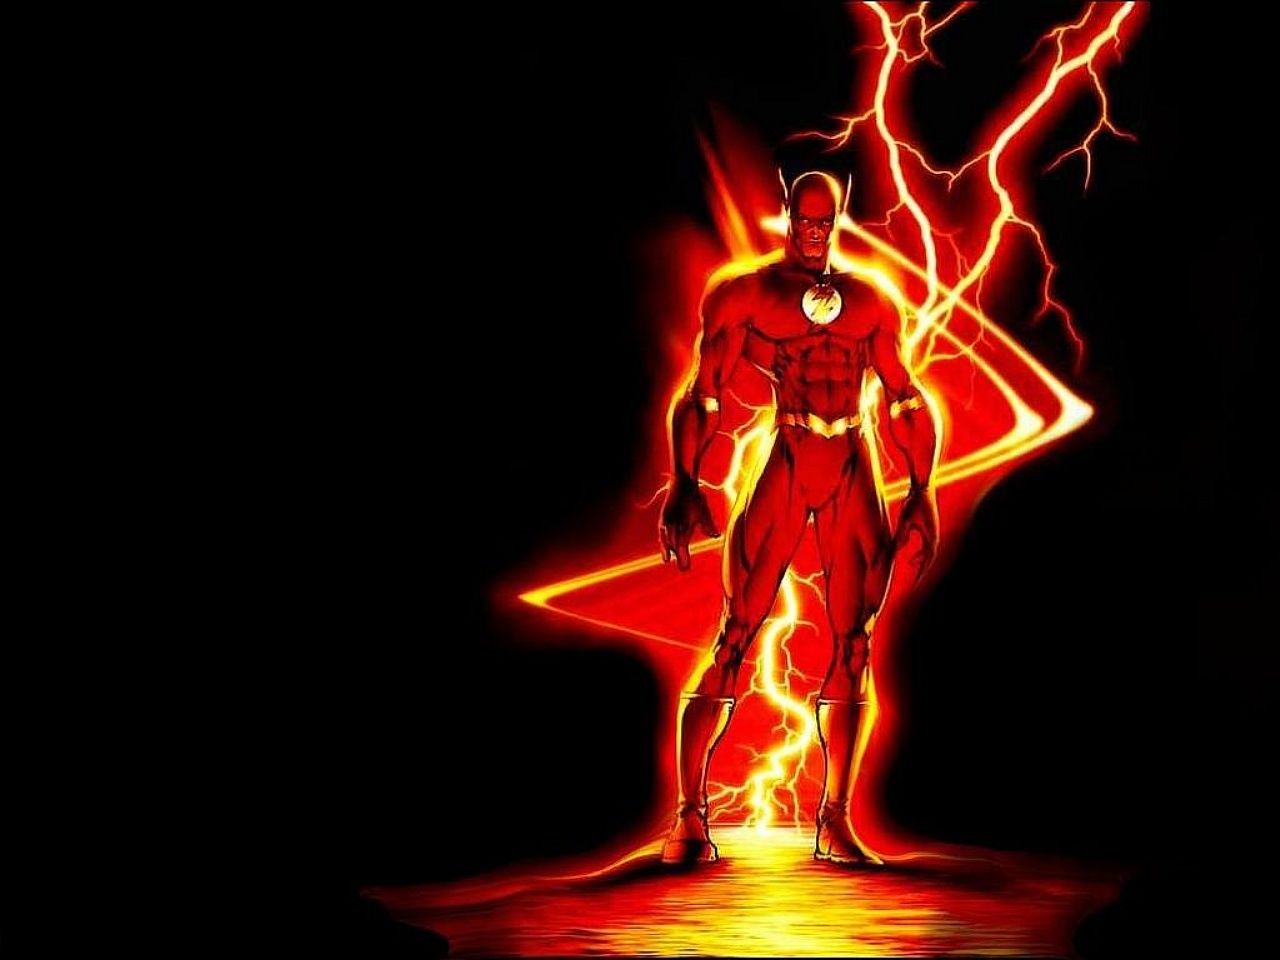 Wallpaper of The Flash